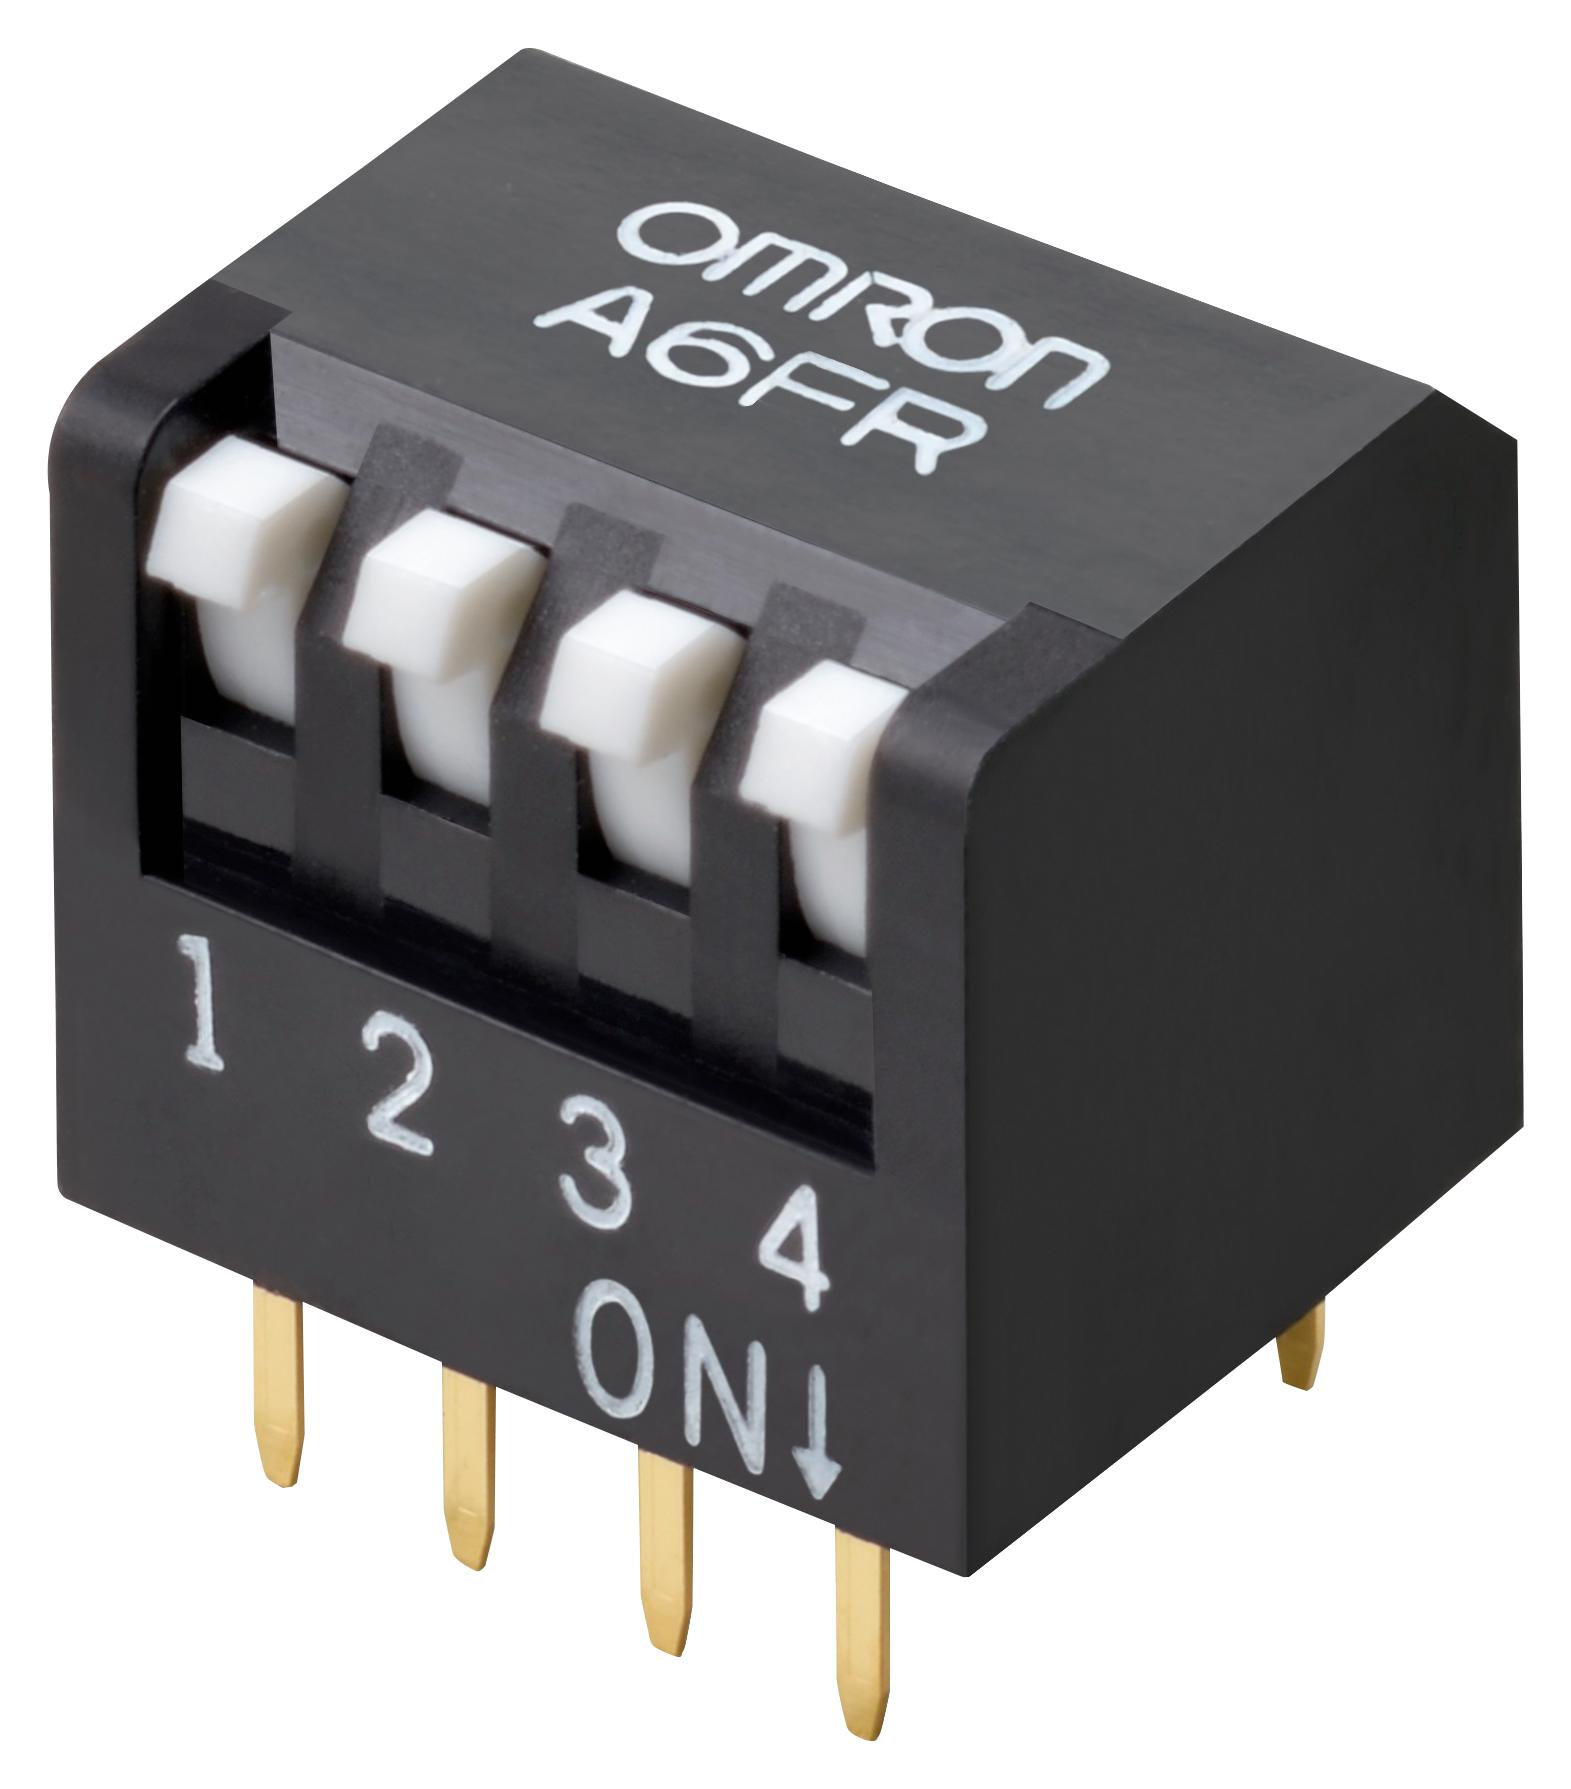 A6FR-8101 DIP SWITCH, 8POS, SPST, PIANO KEY, TH OMRON